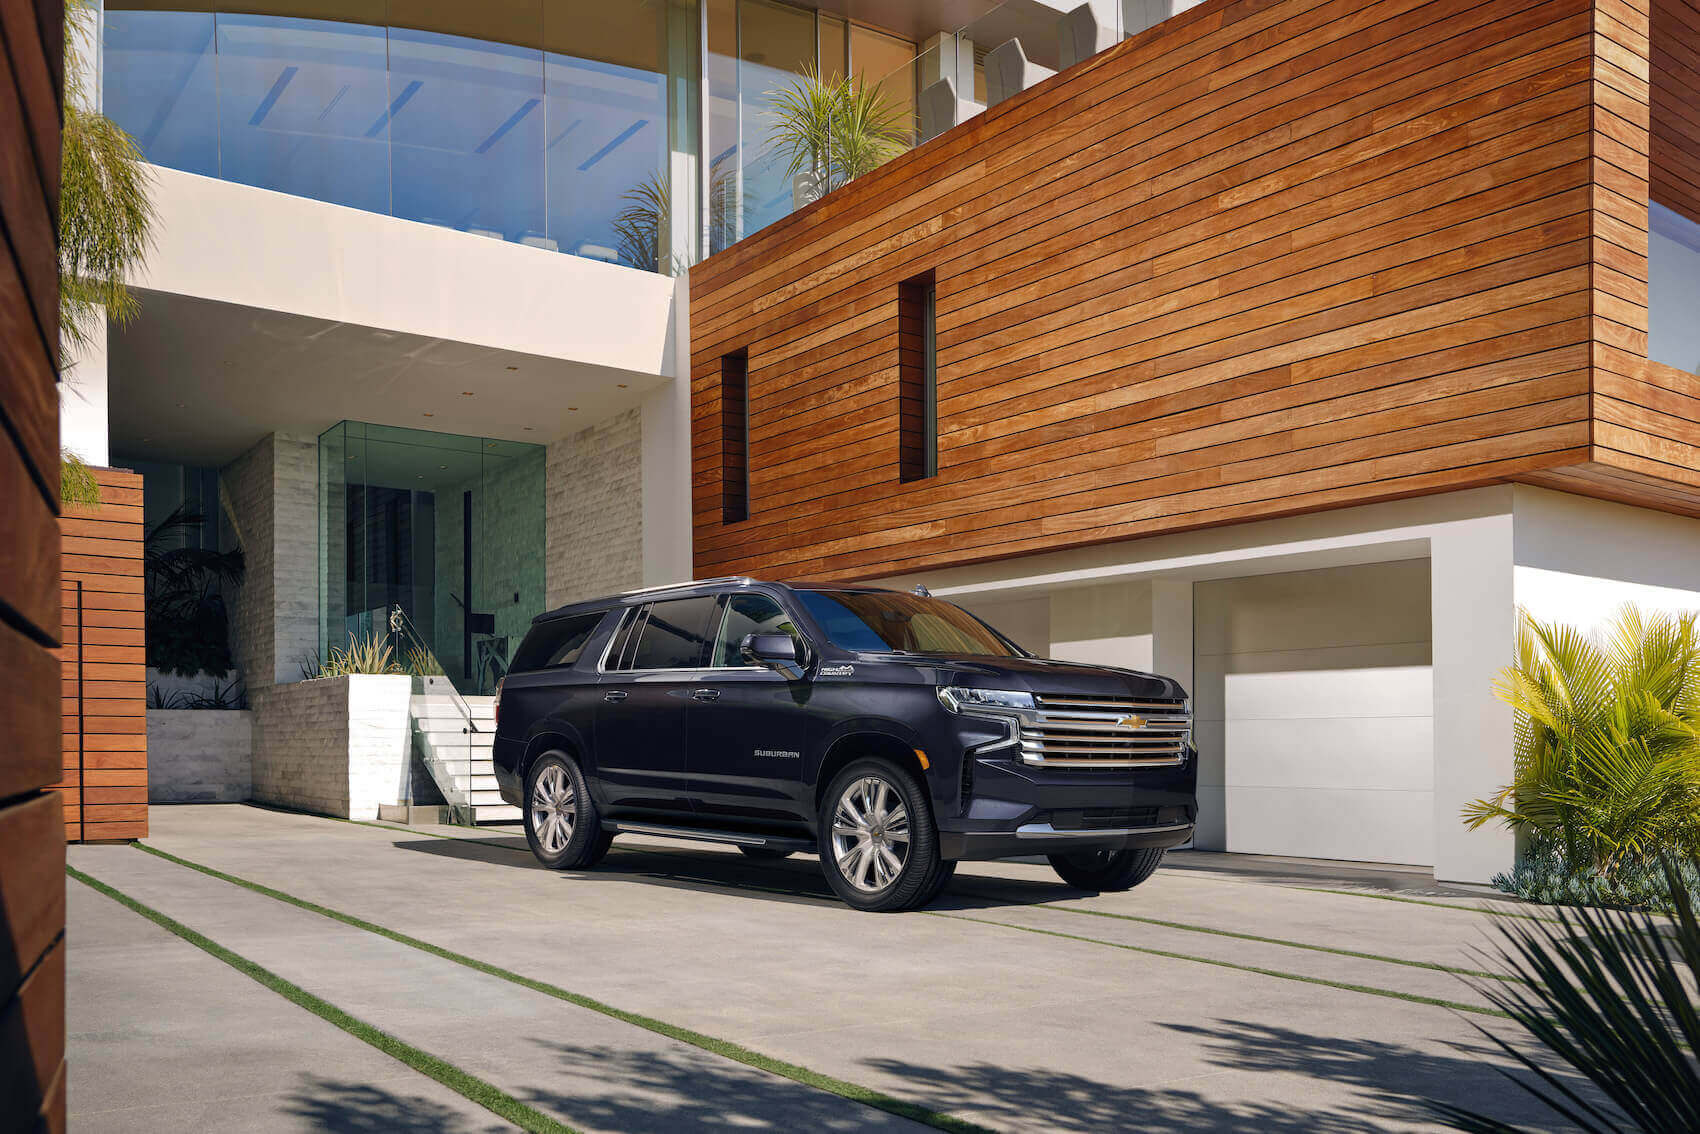 The 2023 Chevy Suburban, the biggest 2023 SUVs, in black parked in front of a modern building with wood accents.